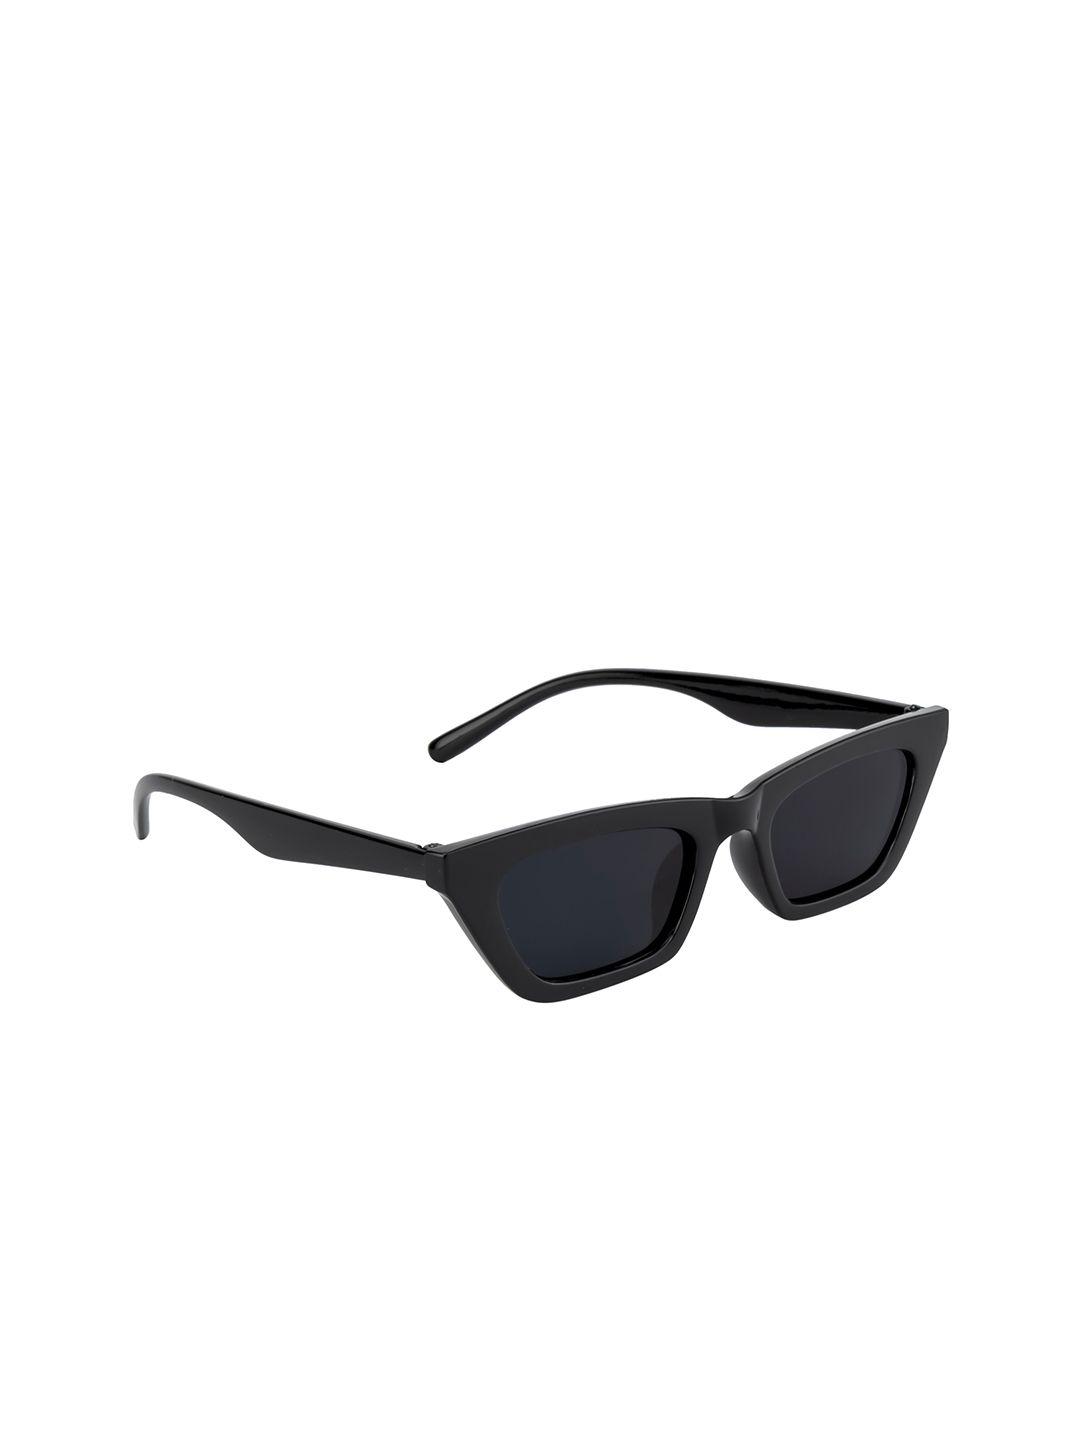 ted smith women grey rectangle uv protected sunglasses ts-allblk_blk